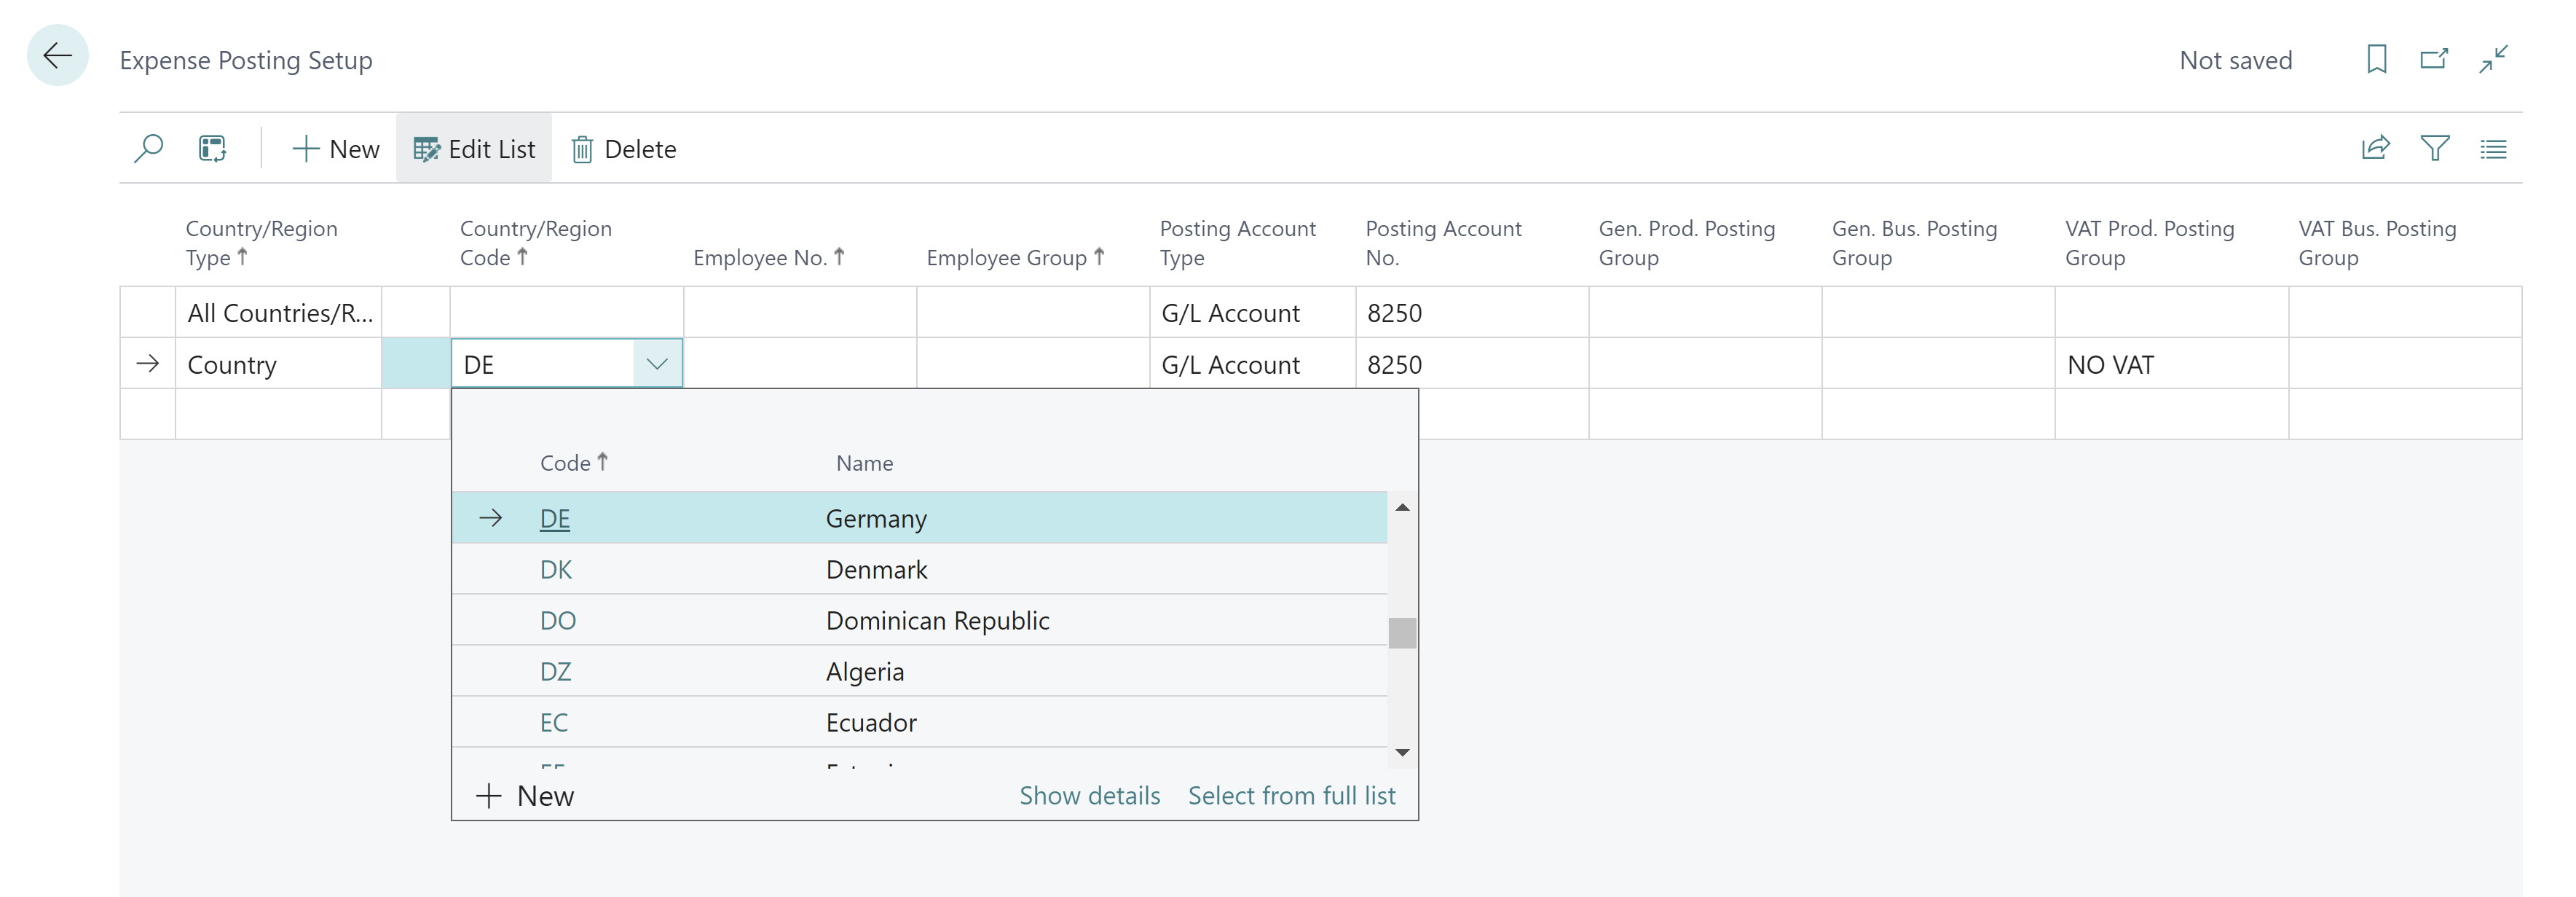 Expense posting setup with country/region columns